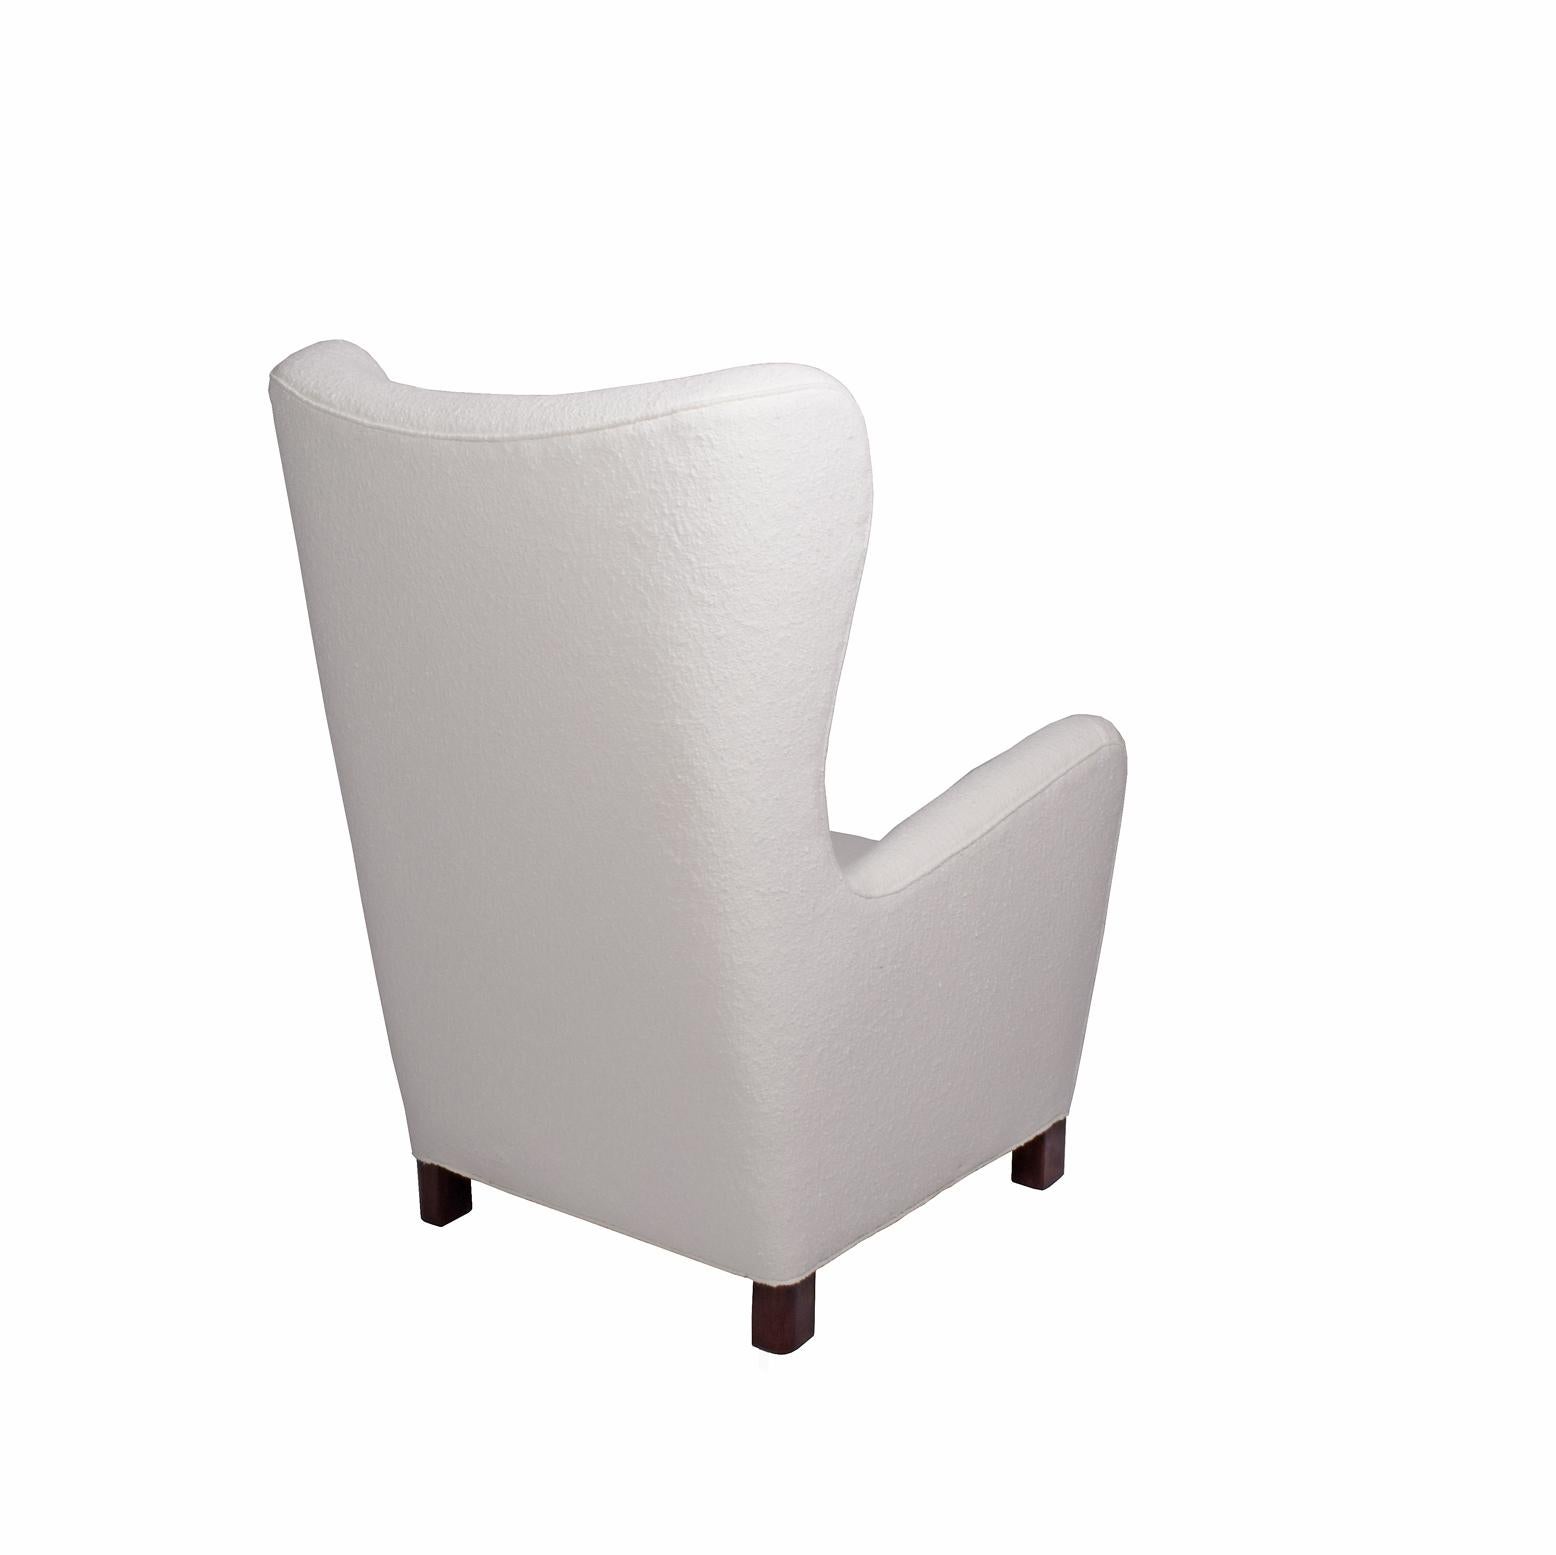 High back easy chair wool white fabric upholstered. Solid legs. Fritz Hansen catalog from 1942.